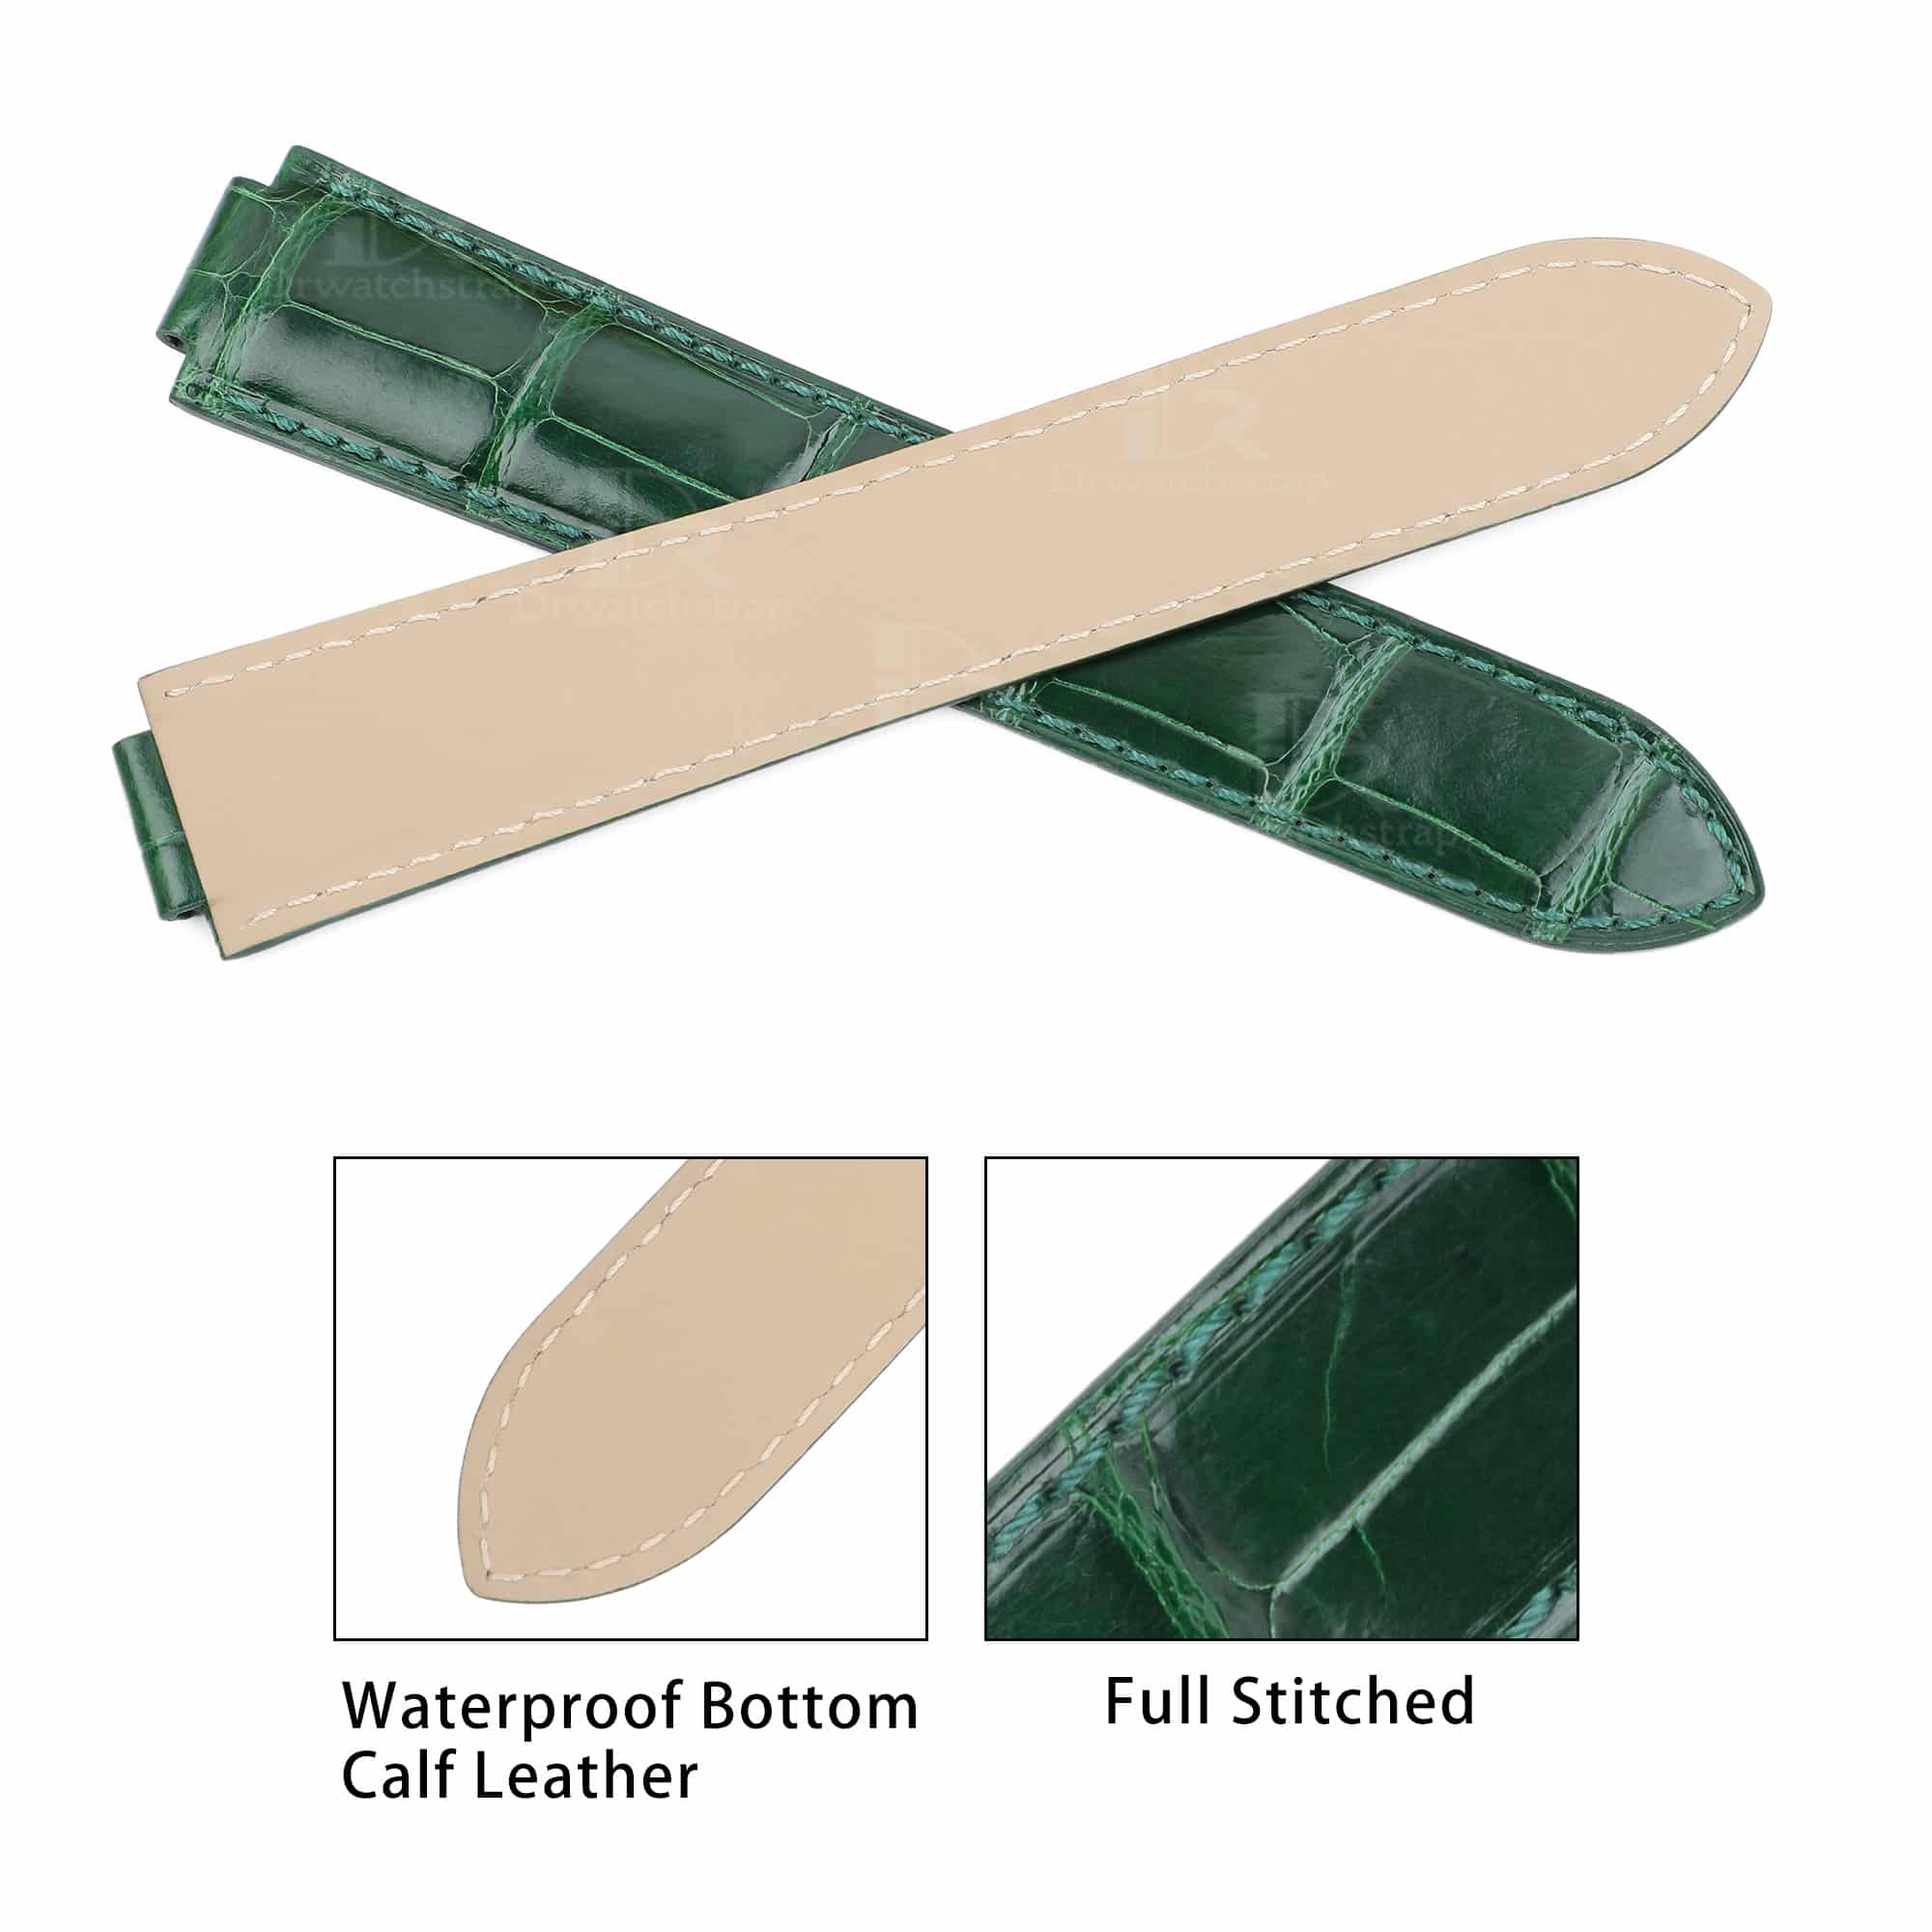 Genuine premium custom American Alligator Belly-scale Green leather watch strap & watch band replacement for Cartier Ballon Bleu Lady Medium Men Large Chronograph Cartier watches online - Buy and shop the high-end best quality straps and watchbands from dr watchstrap at a low price